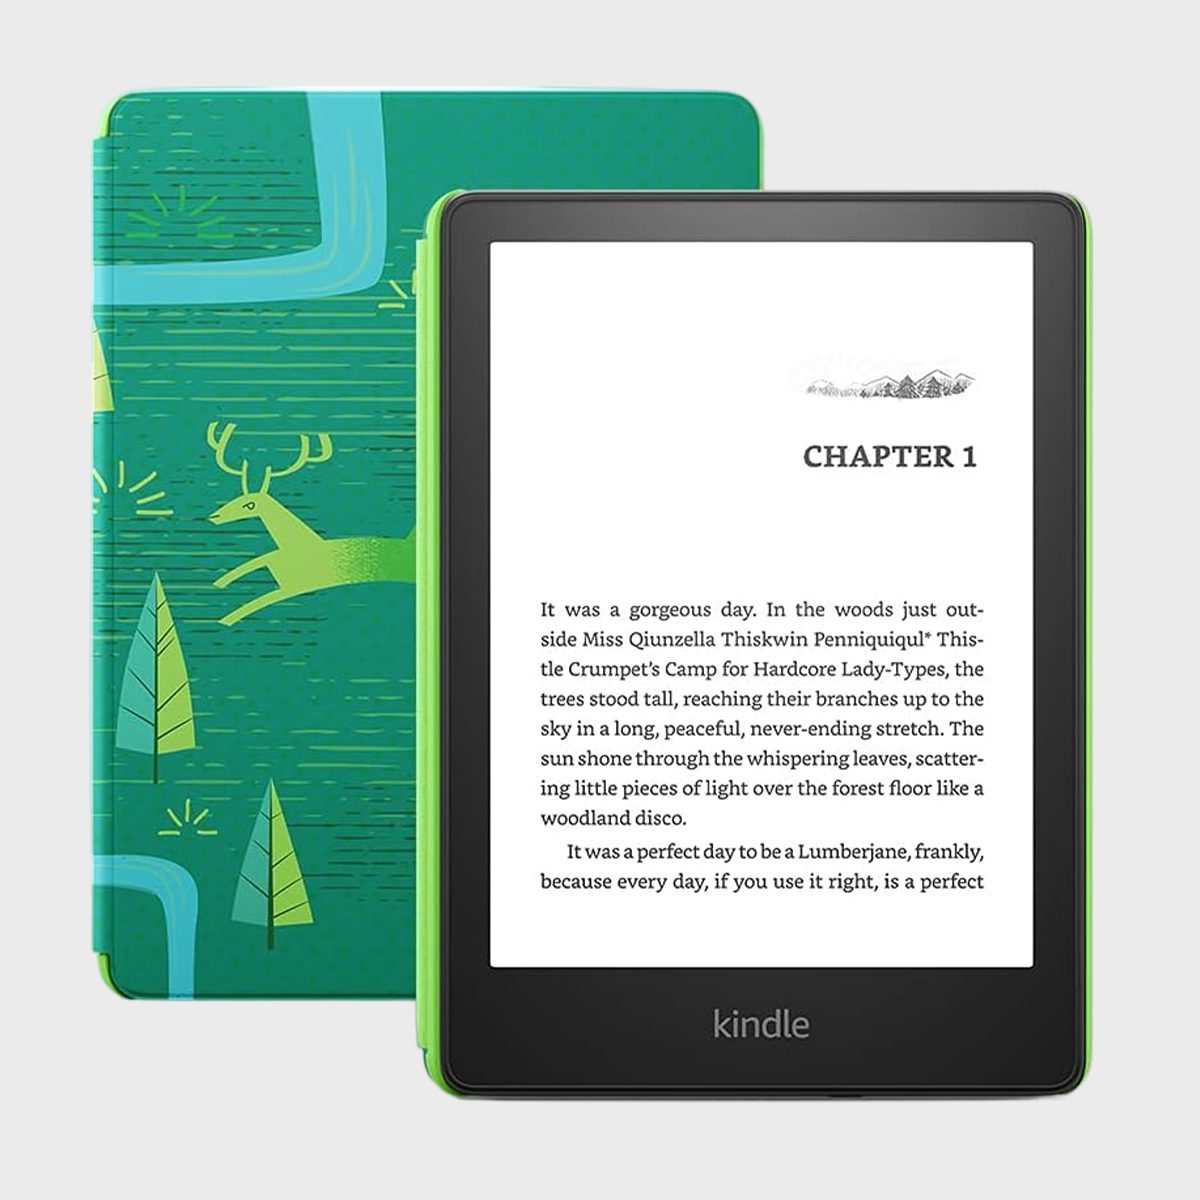 <p>Your favorite bookworm can take her library wherever she goes thanks to this ultra lightweight <a href="https://www.amazon.com/dp/B0BL8S6ZPT/" rel="noopener noreferrer">Kindle Paperwhite Kids</a>. This e-reader features everything you love about the standard Kindle Paperwhite: it holds thousands of titles, has a 6.8-inch, glare-free display and an adjustable warm light that reads just like paper. This <a href="https://www.rd.com/list/must-have-gifts-book-lovers/">book lover gift</a> also has up to 10 weeks of battery life, 20% faster page turns and is built to withstand accidental immersion in water.</p> <p>But this one also comes with a one-year subscription to Amazon Kids+, which provides unlimited access to thousands of some of the <a href="https://www.rd.com/list/the-best-childrens-books-ever-written/" rel="noopener noreferrer">best children's books</a>. It also features the Amazon Parent Dashboard, which provides complete control for parents to set reading and bedtime schedules, allows Kids to request books to add to their library and offers literacy tools like Word Wise and Vocabulary Builder.</p> <p class="listicle-page__cta-button-shop"><a class="shop-btn" href="https://www.amazon.com/dp/B0BL8S6ZPT/">Shop Now</a></p>